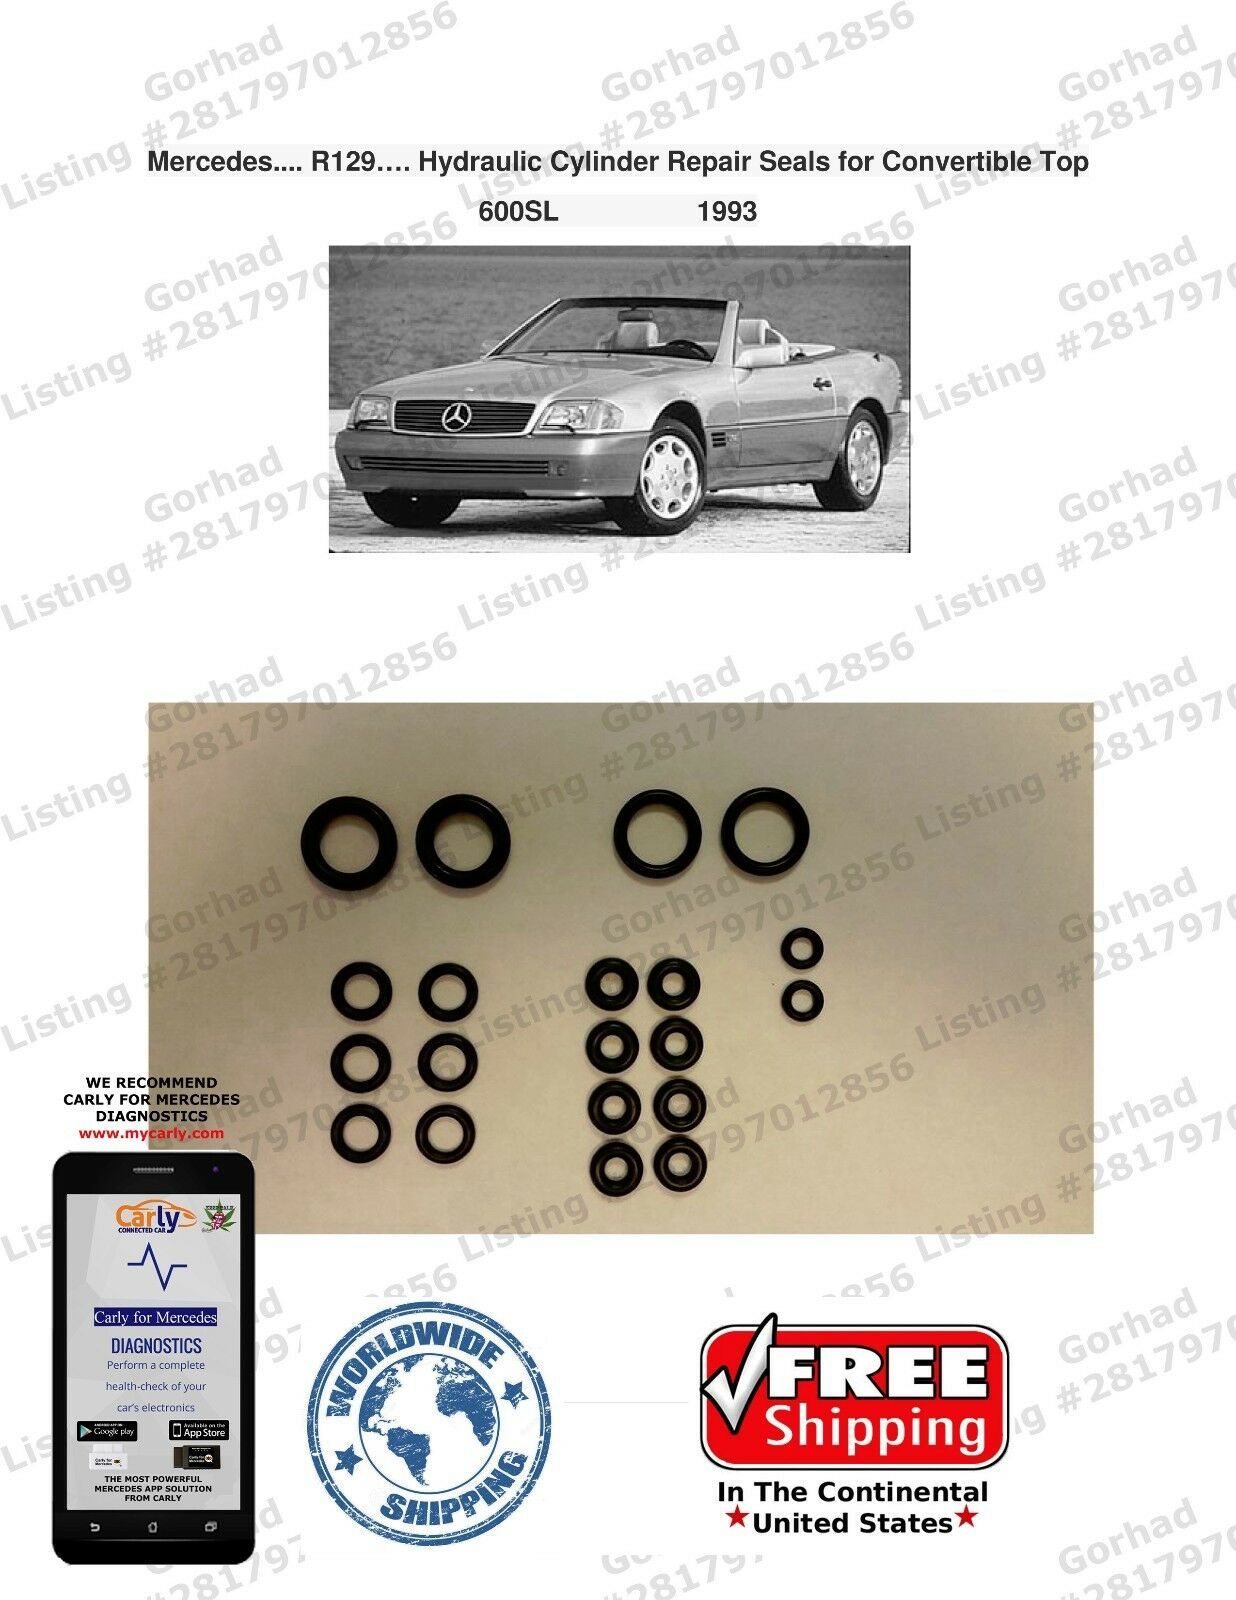 93-93 Mercedes 600SL Hydraulic Cylinder Repair Seals for Convertible Top...R129 - $15.79